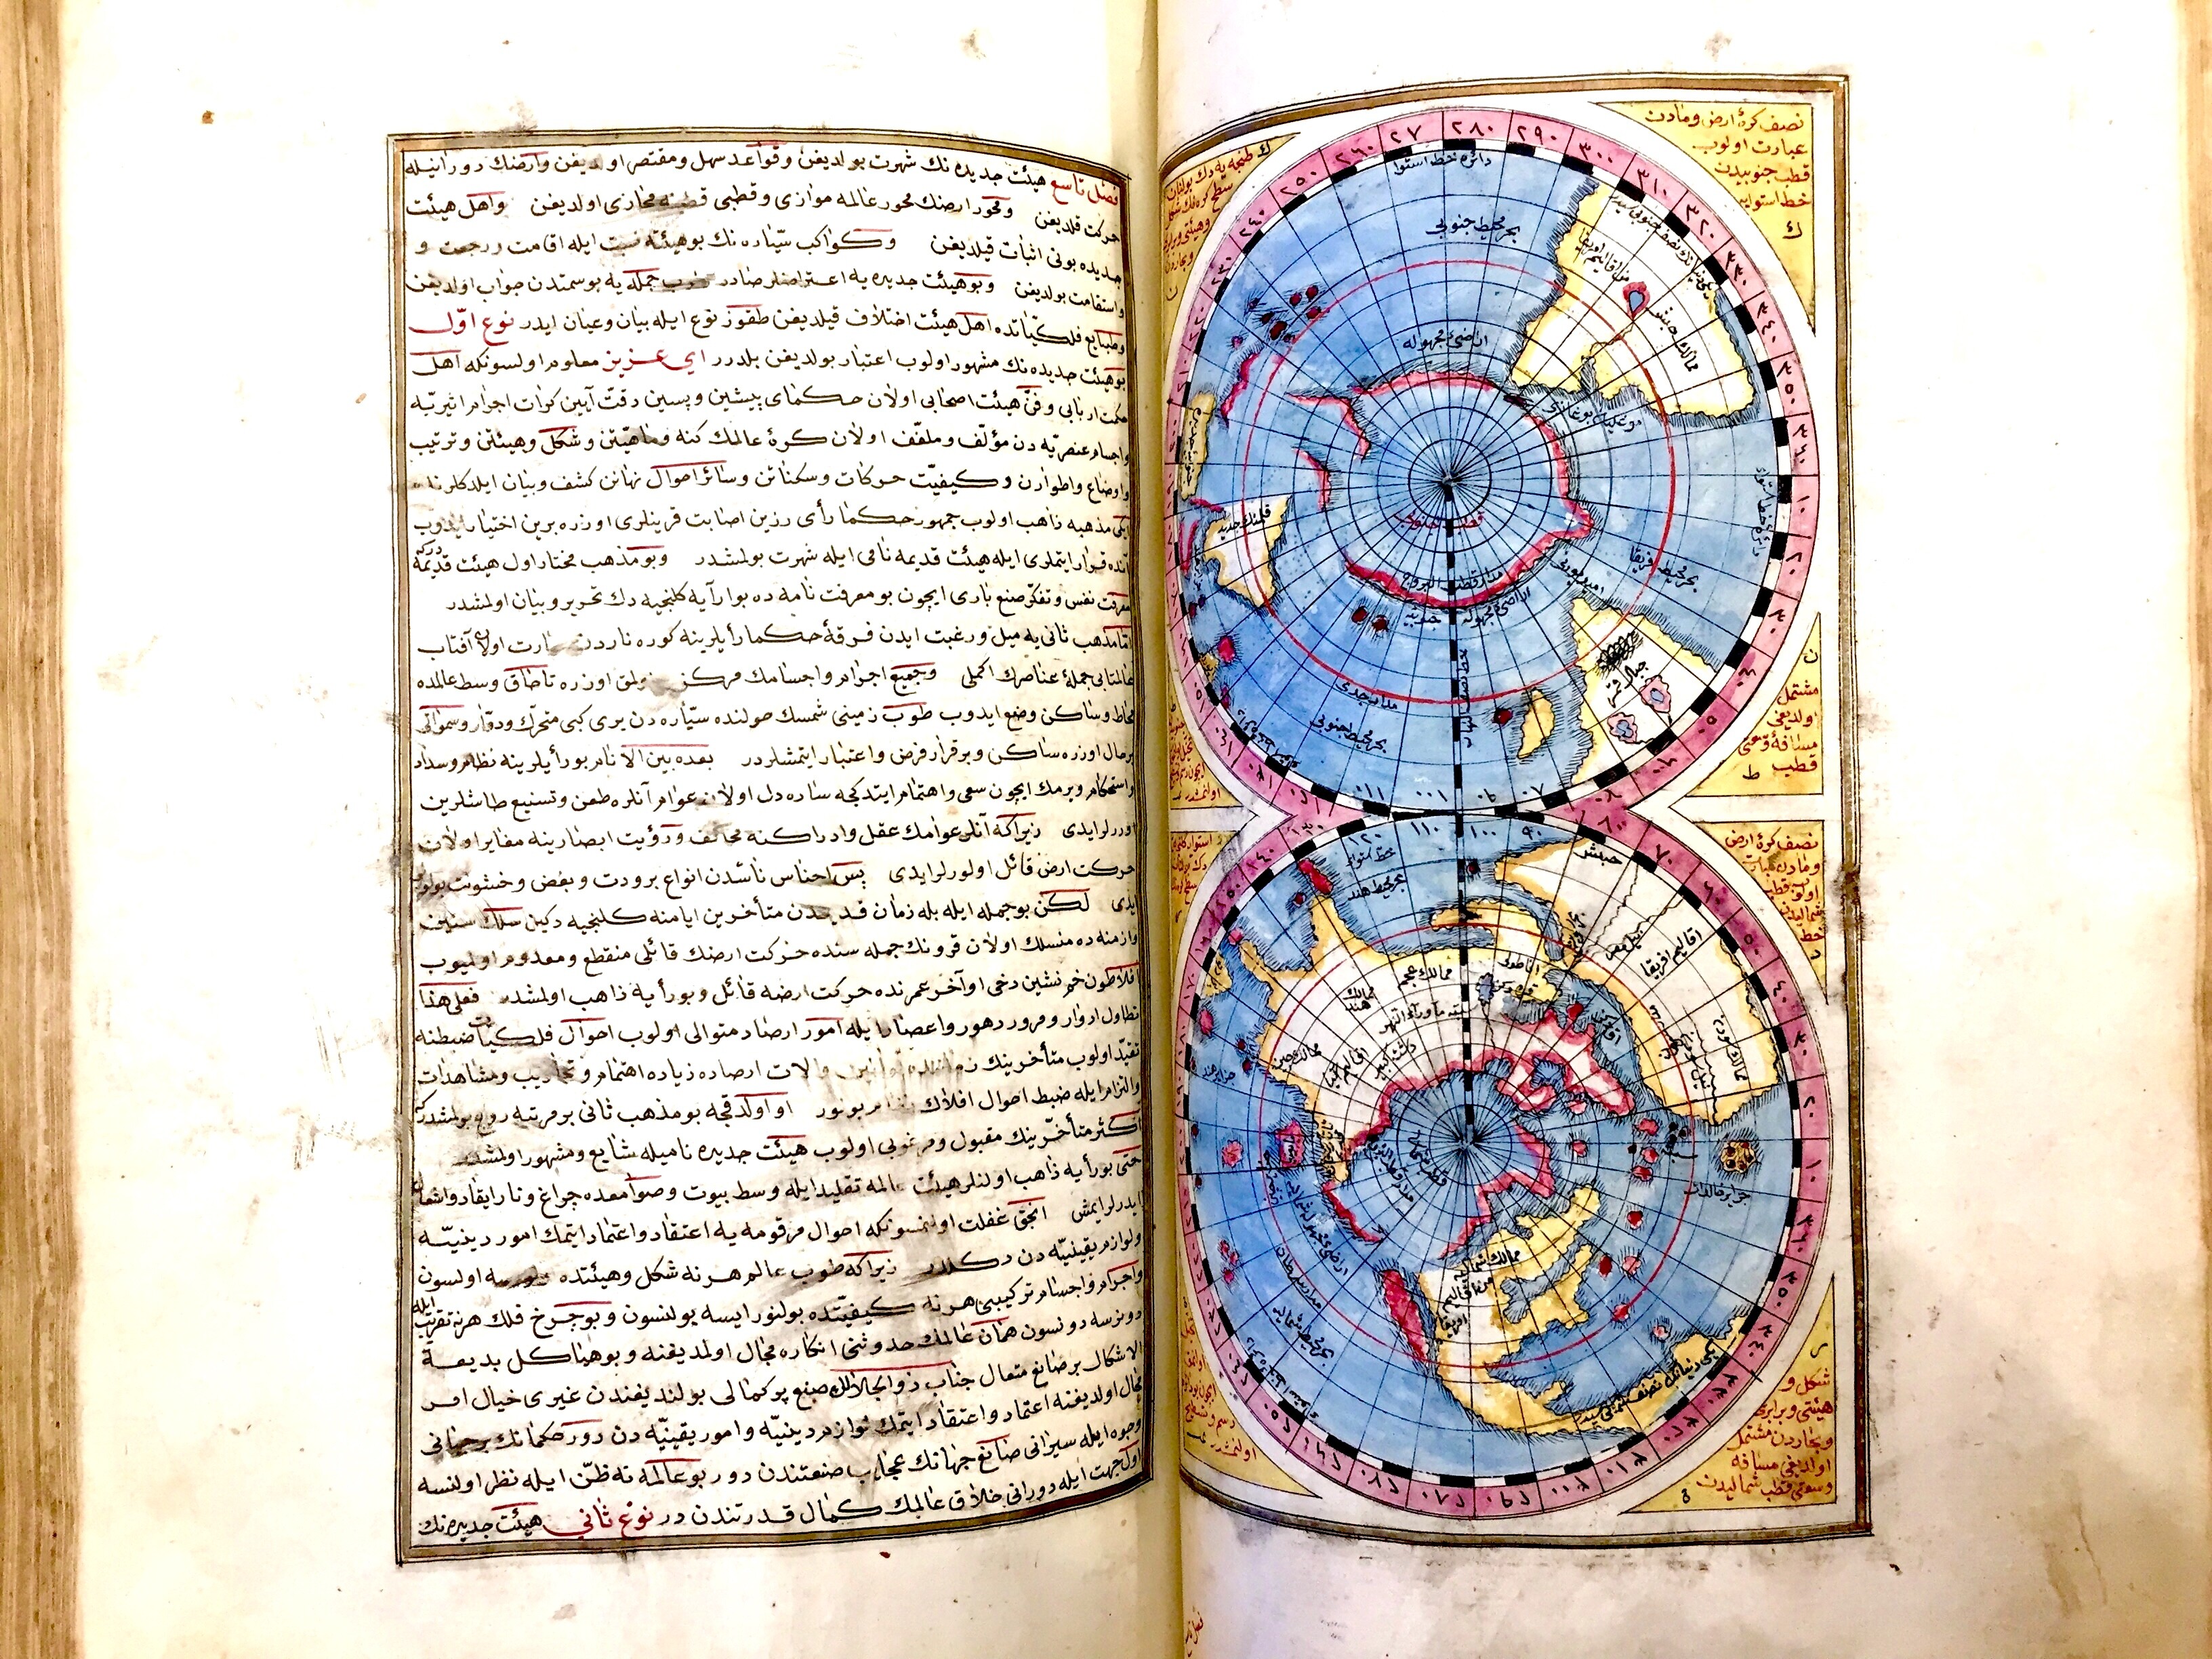 Two manuscript pages, one containing text in Arabic script and the other a map of the world from the perspective of the two poles.